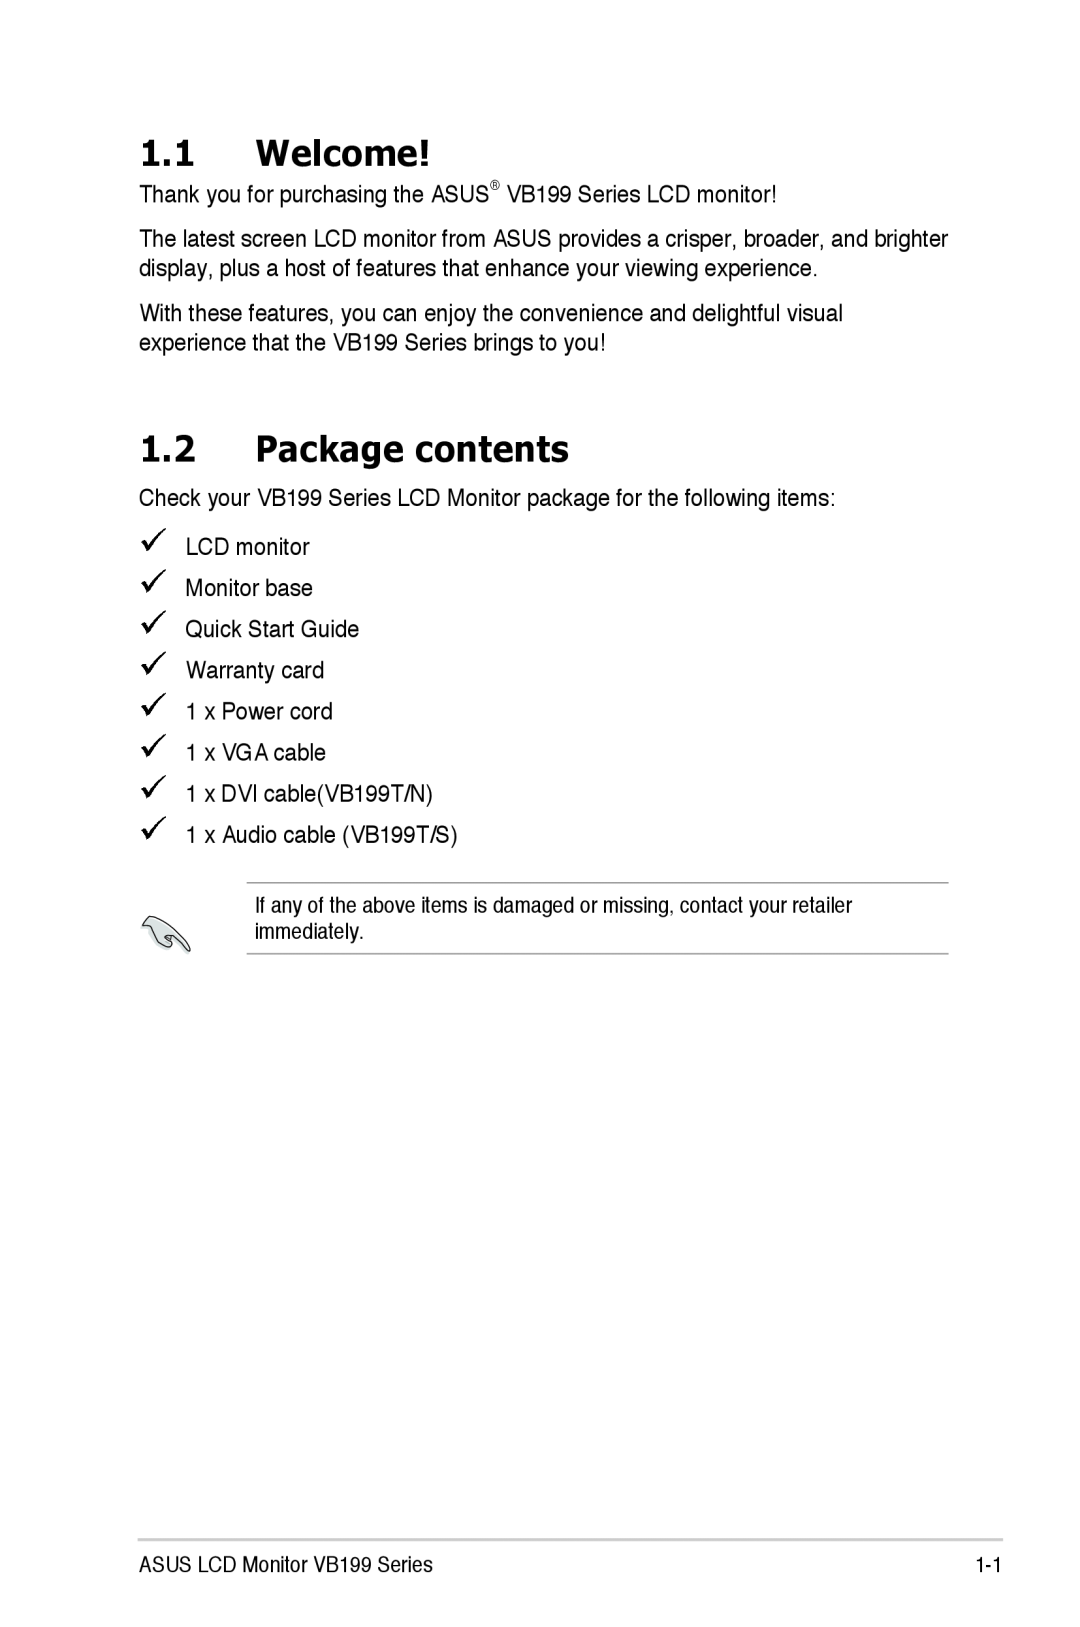 Asus VB199 Series manual Welcome, Package contents 